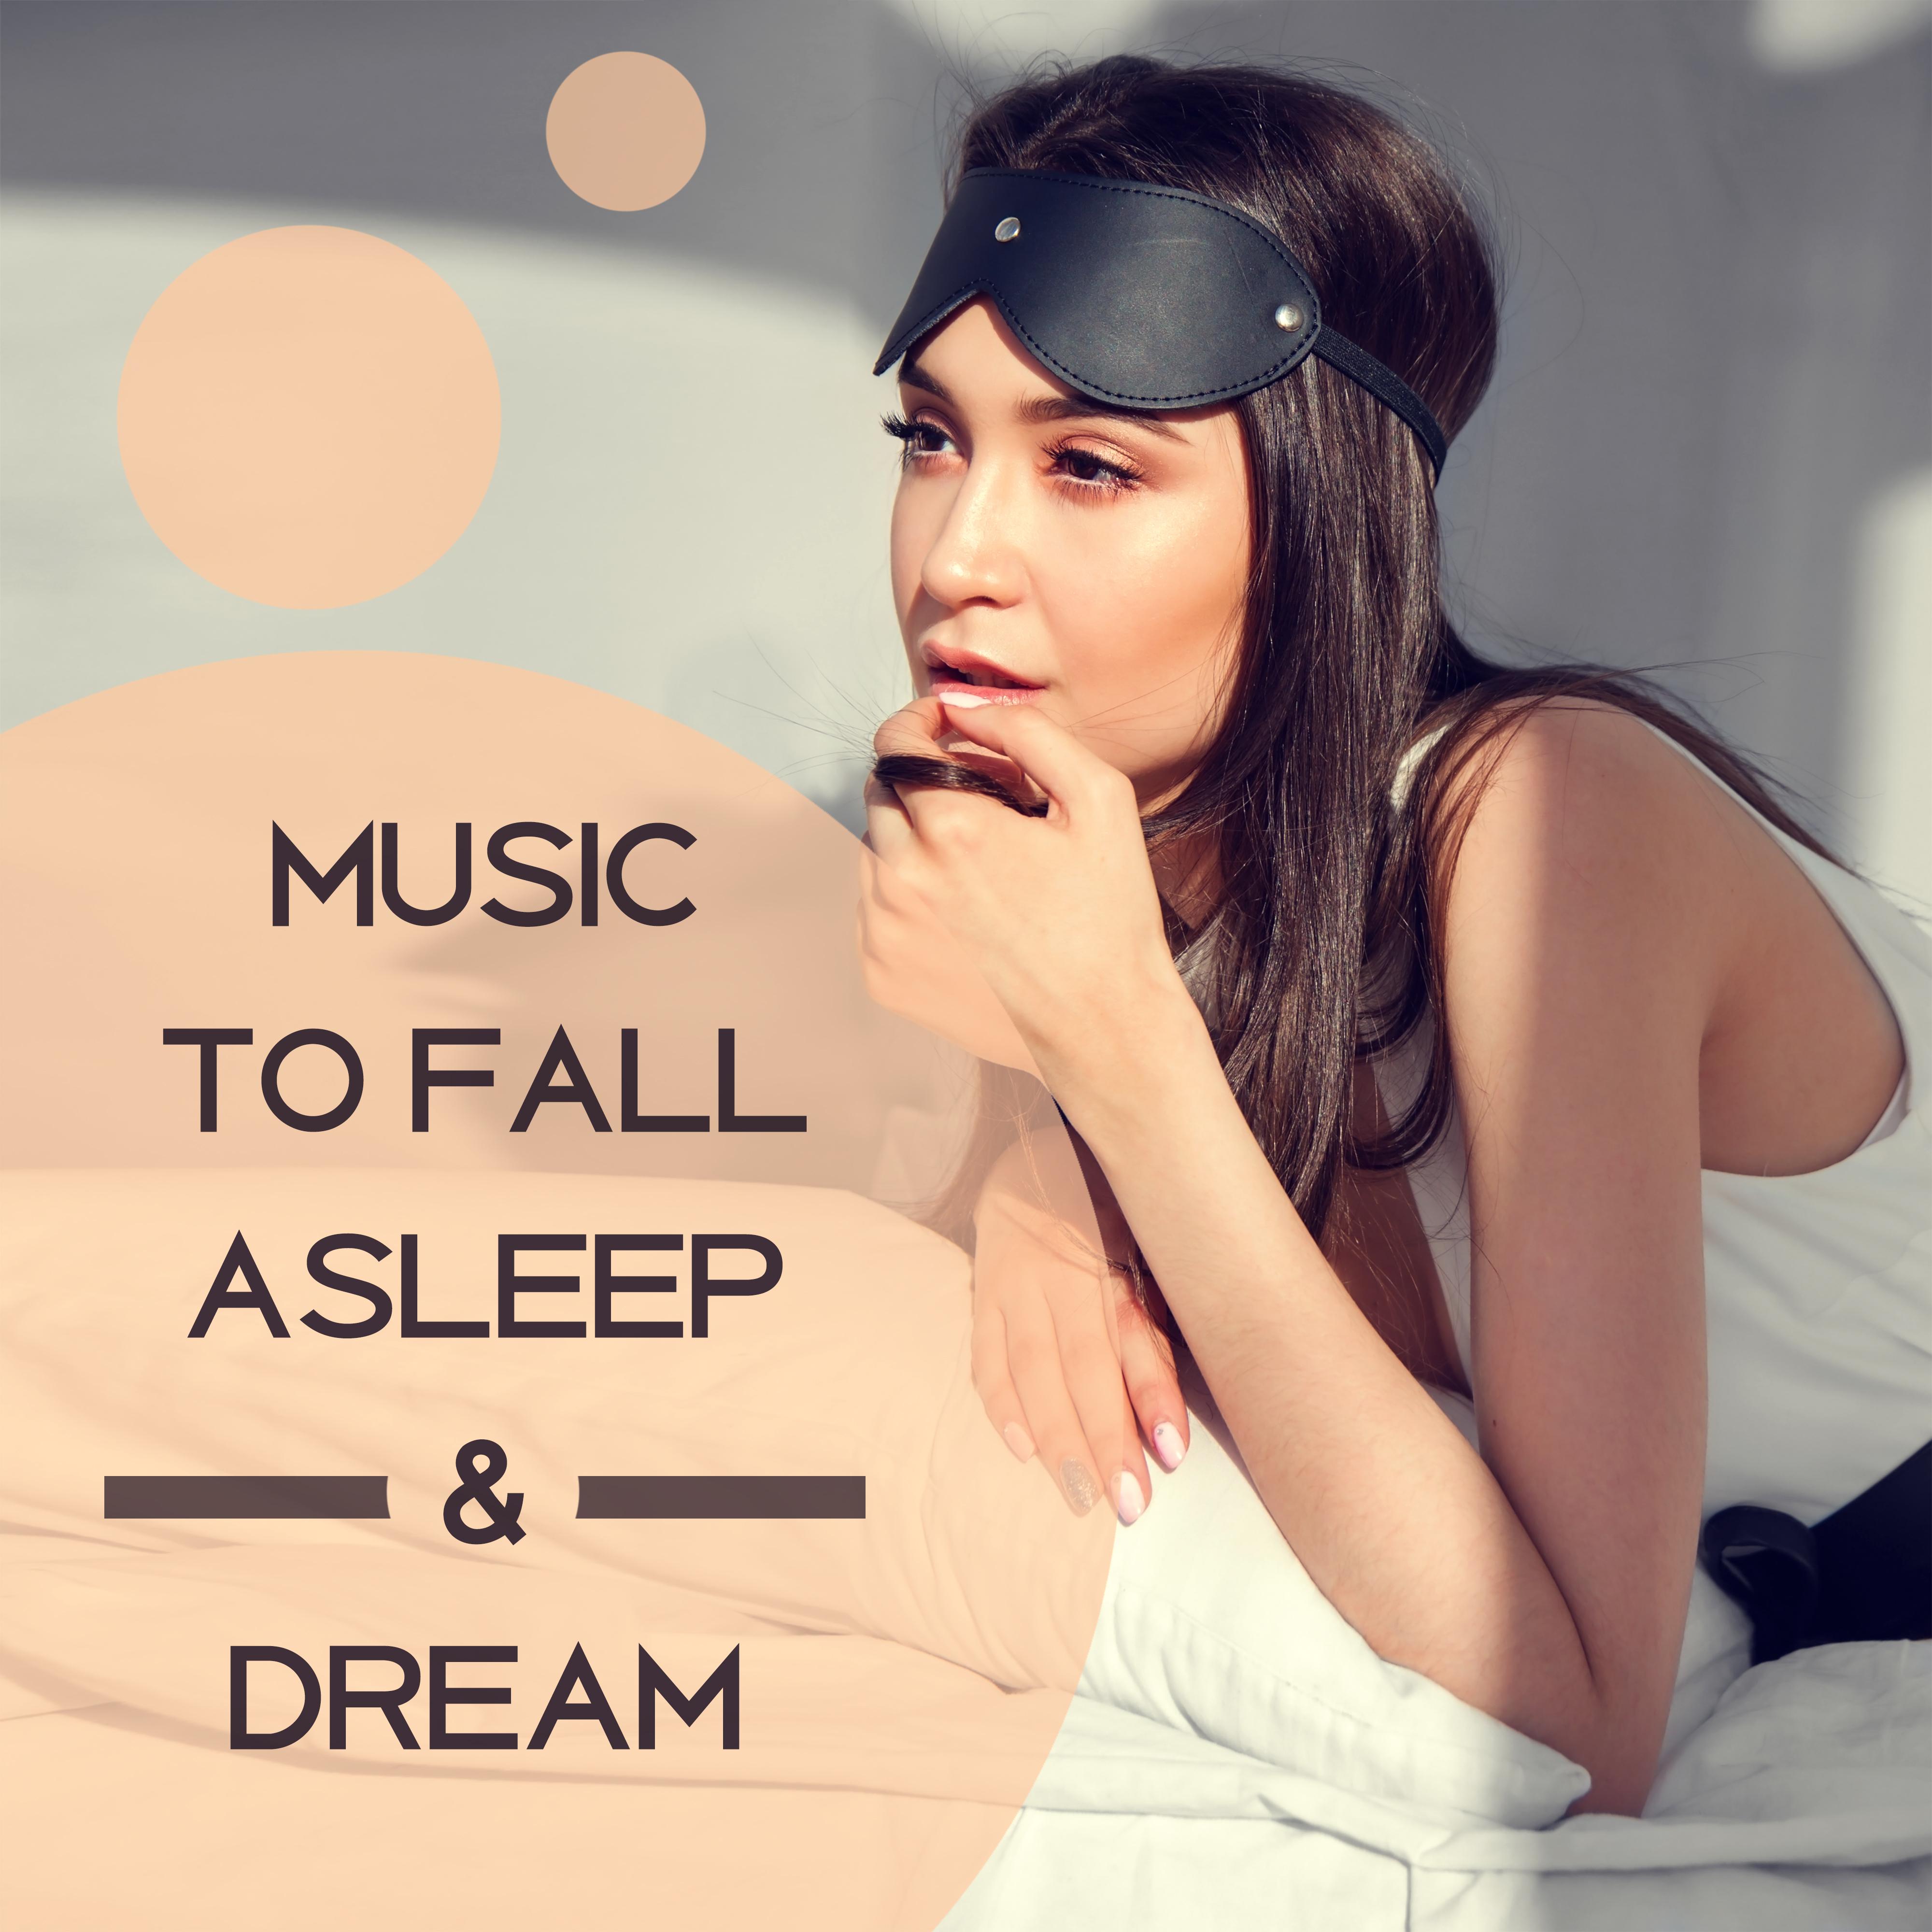 Music to Fall Asleep  Dream  Soothing Sounds, Rest with Calm Sounds, New Age Dreaming, Sleeping Hours